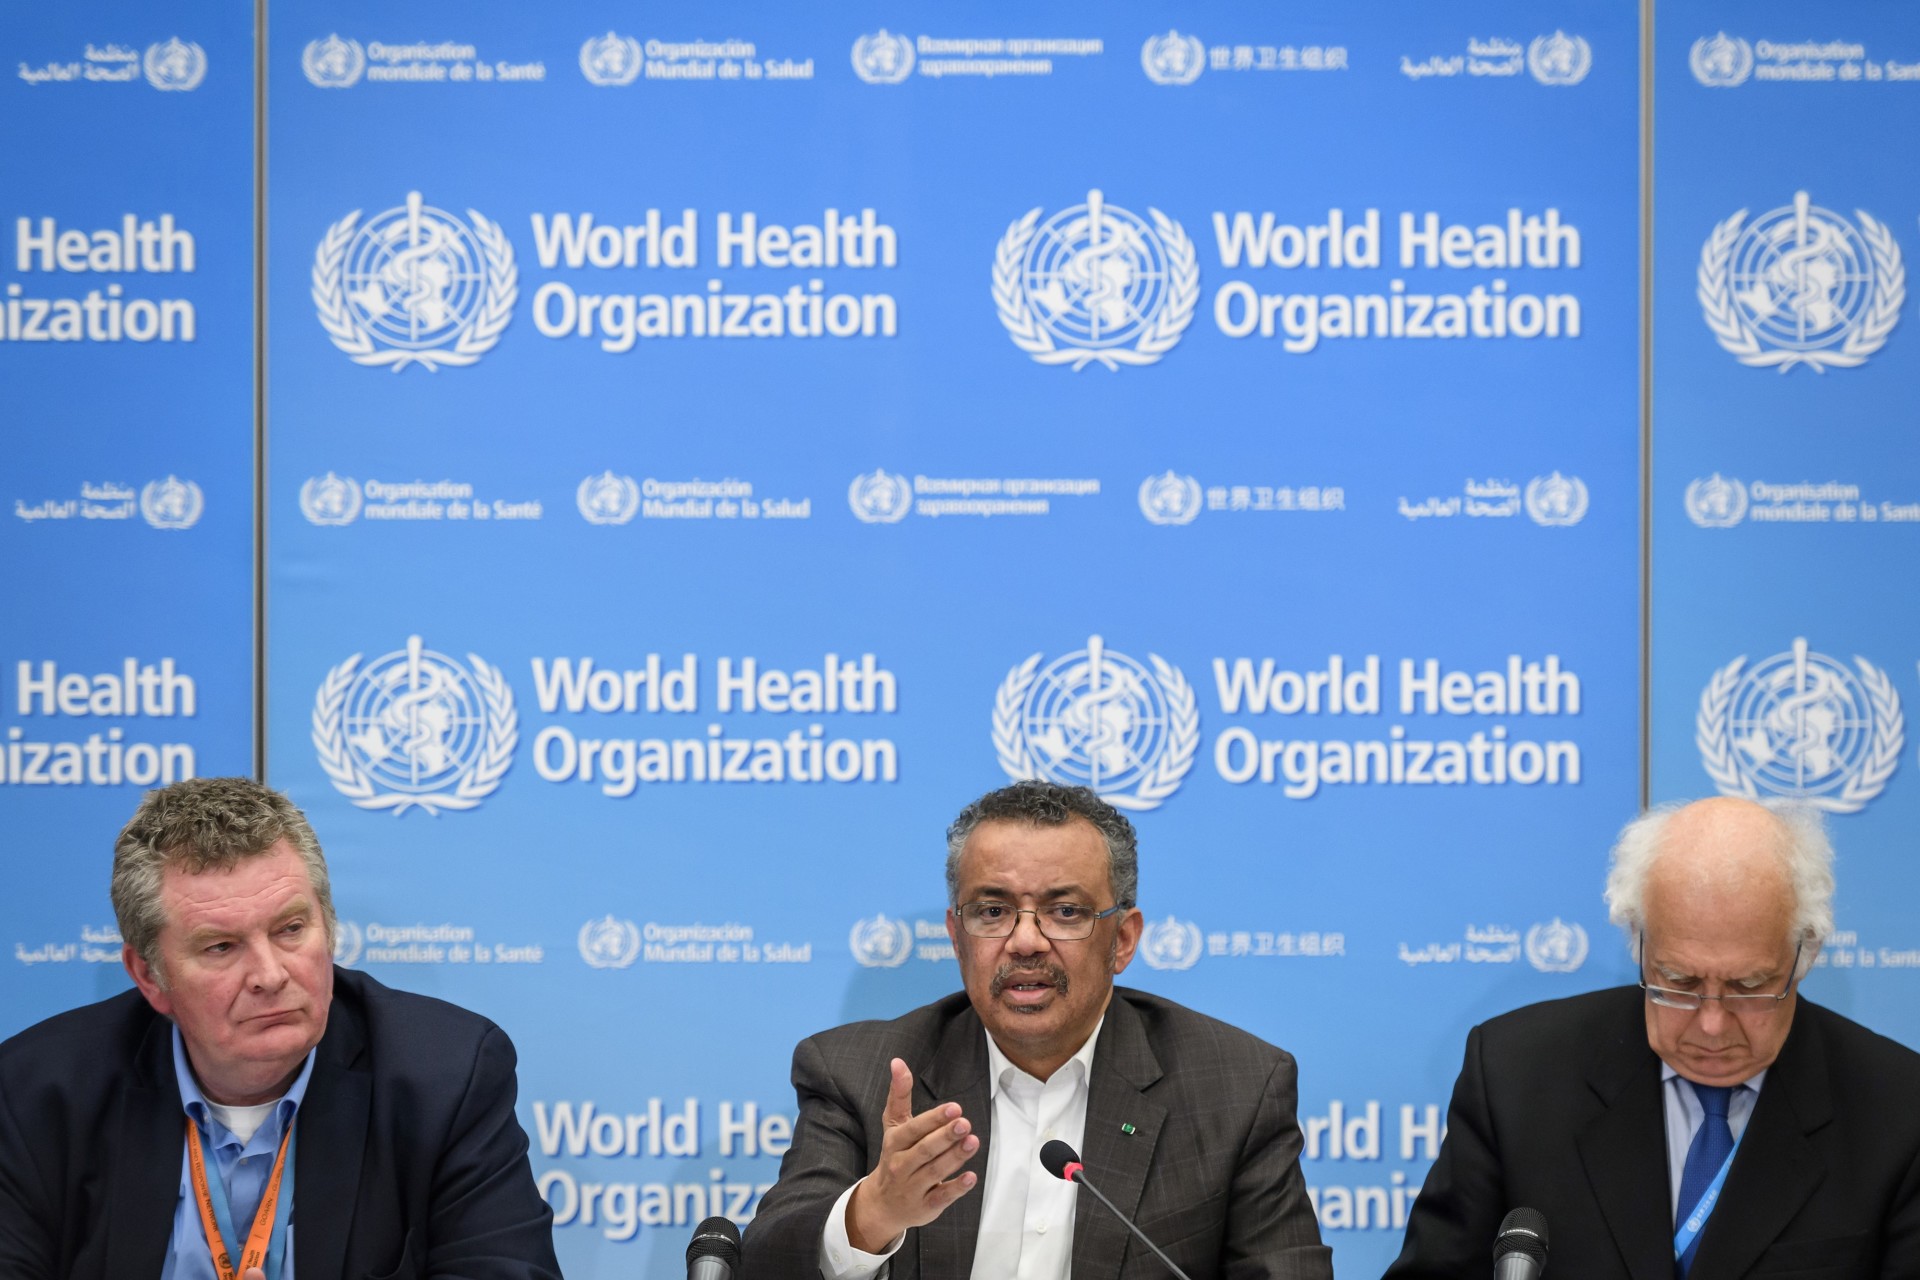 How the U.S. Should Deal with the WHO